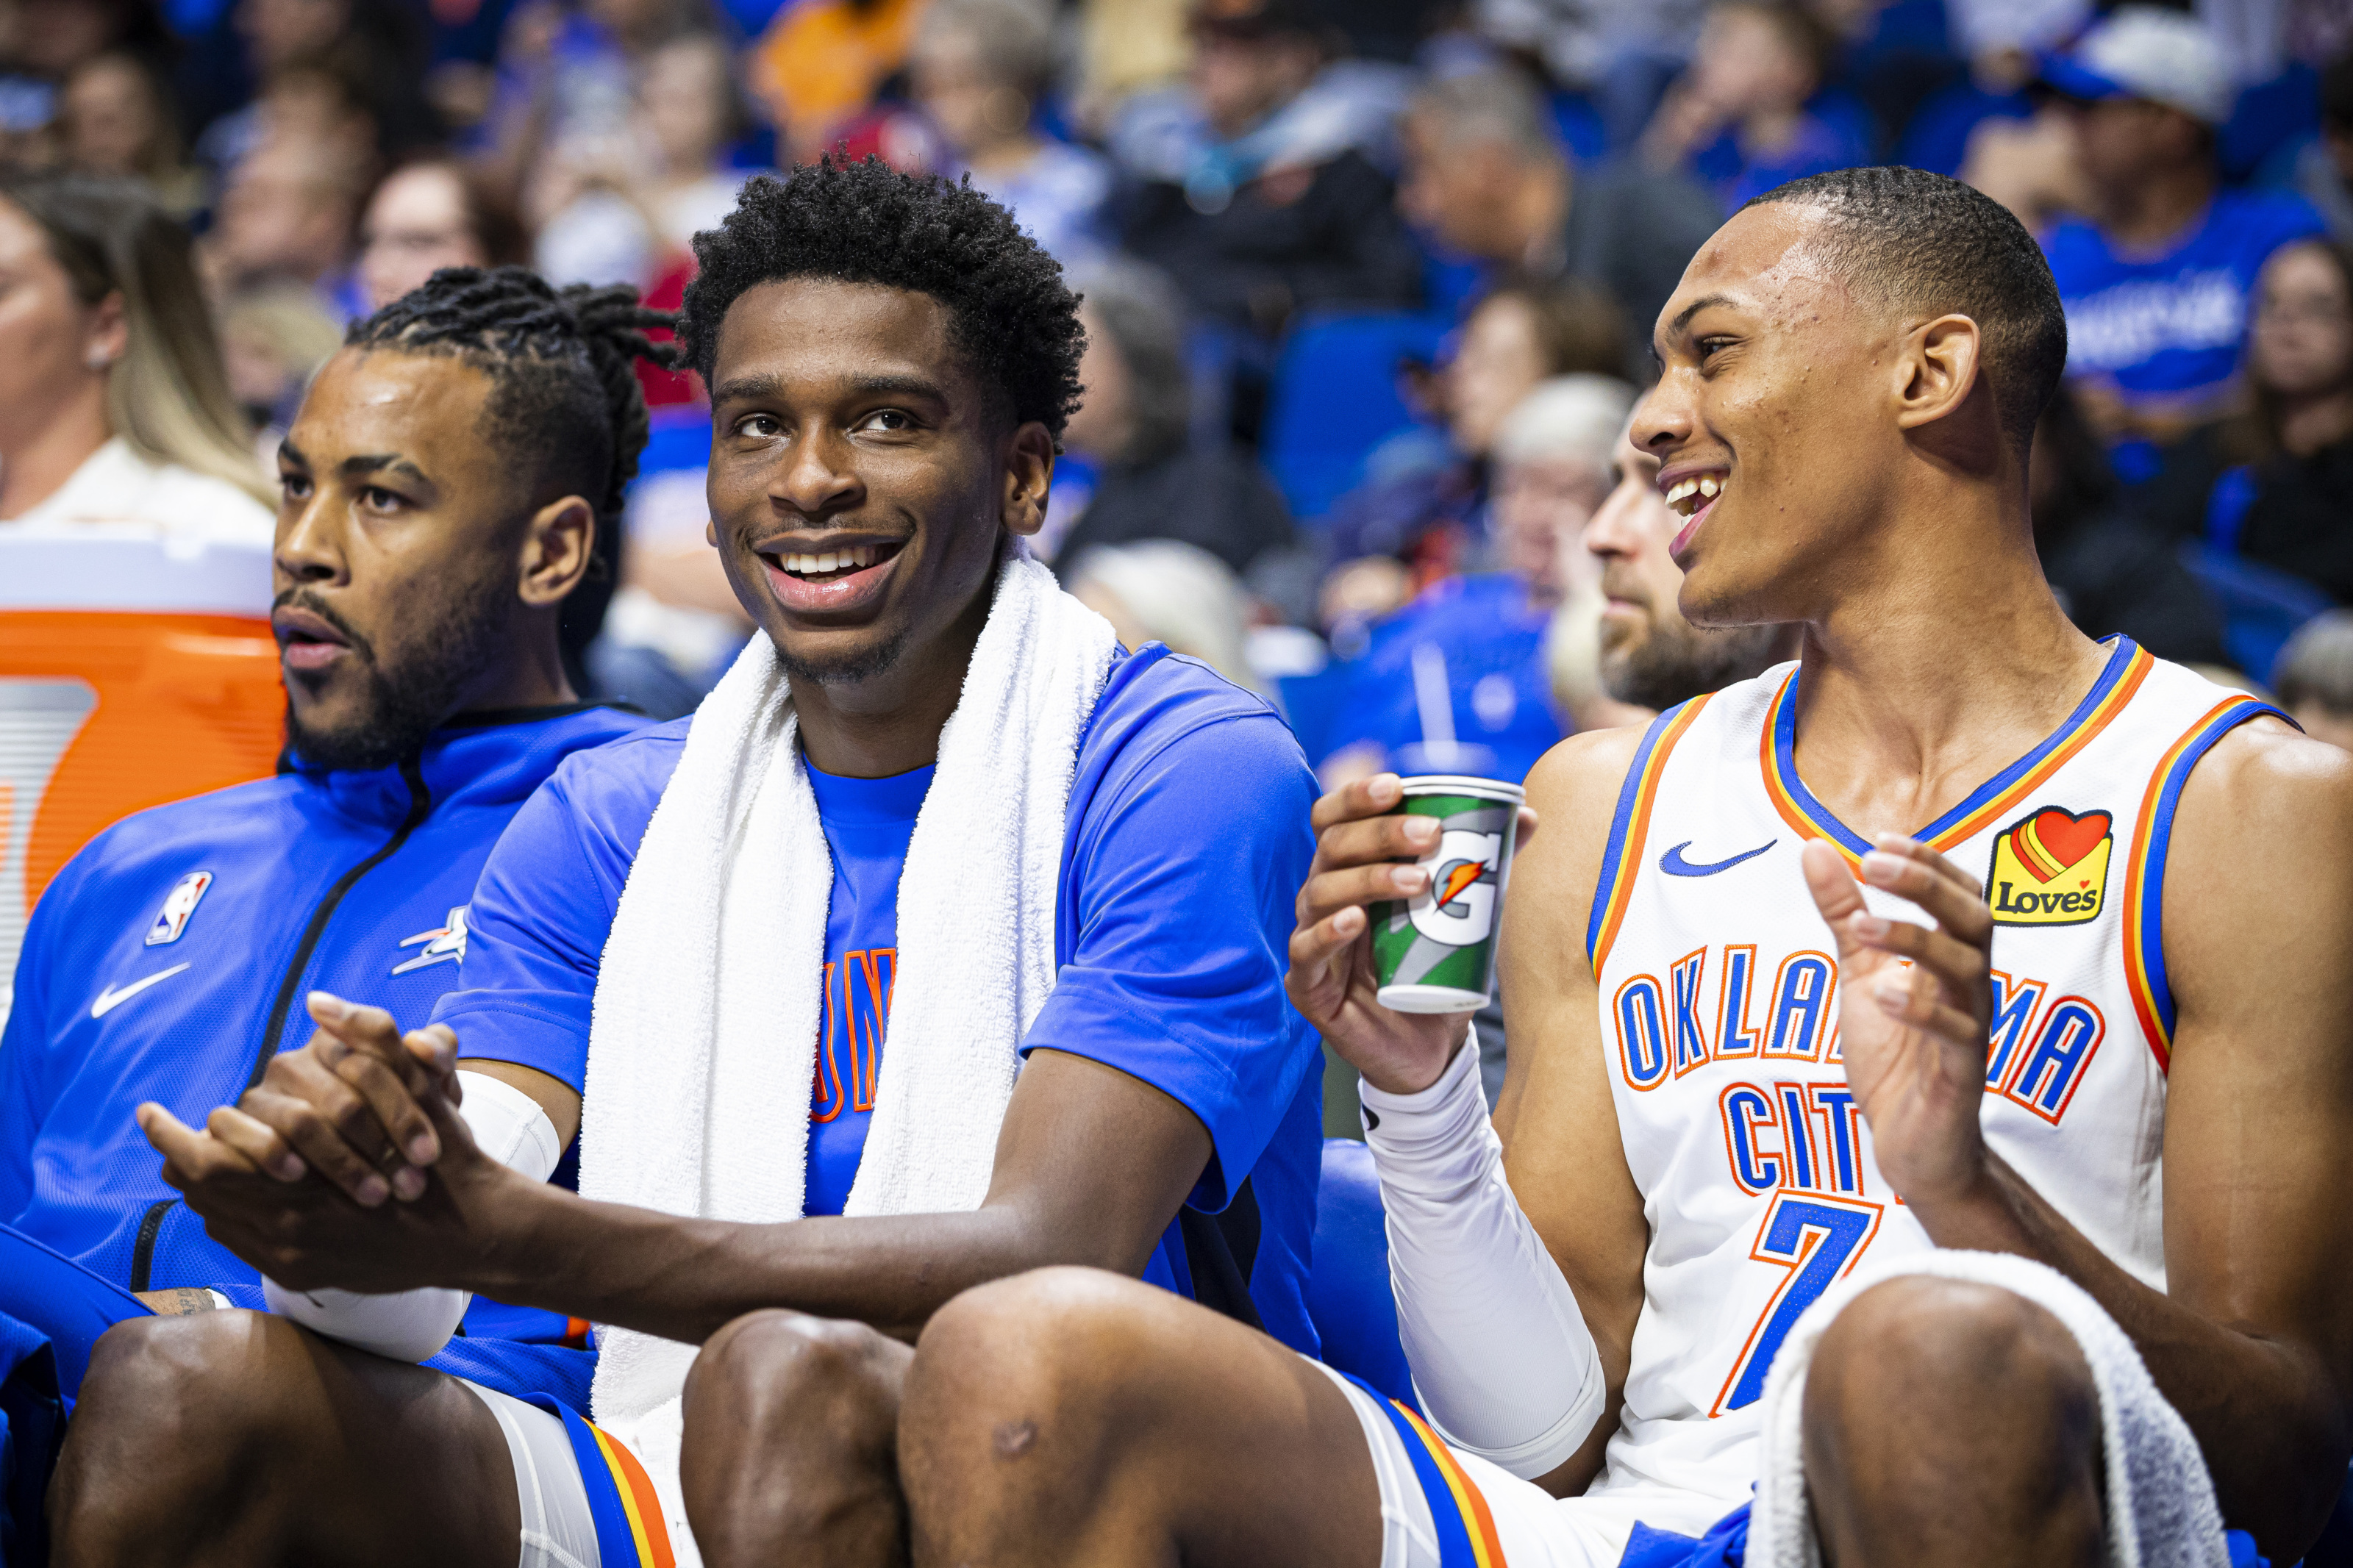 Is Shai Gilgeous-Alexander ready to be the face of OKC Thunder?